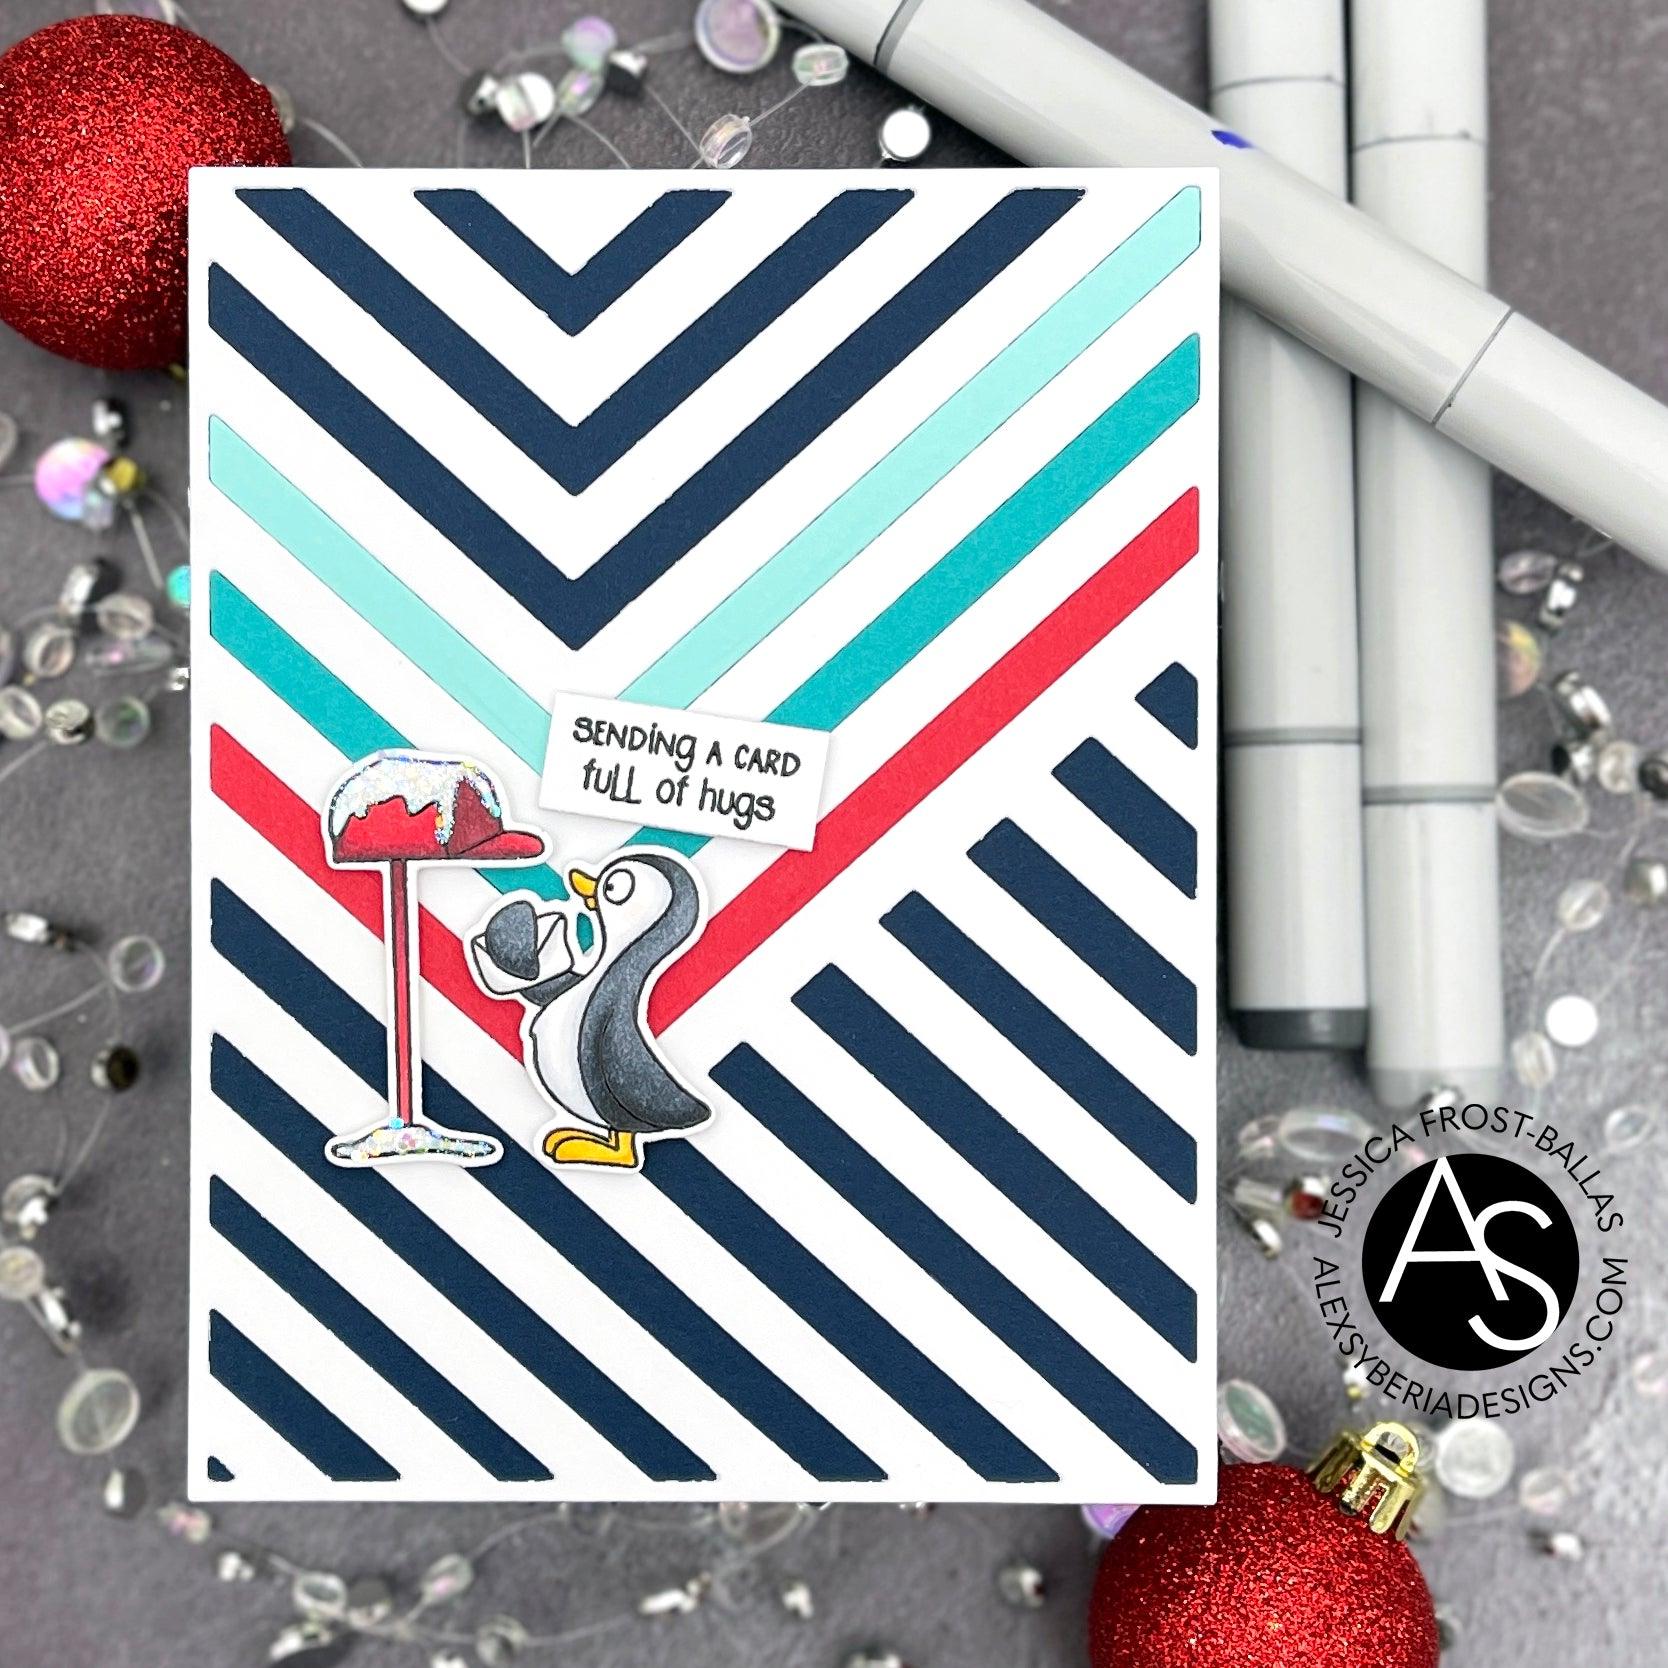 modern-stripes-die-cover-a2-alex-syberia-designs-cardmaking-diecutting-handmadecards-ideas-tutorials-papercrafting-brands-diycards-cutting-machine-penguin-stamp-christmas-cards-winter-hugs-card